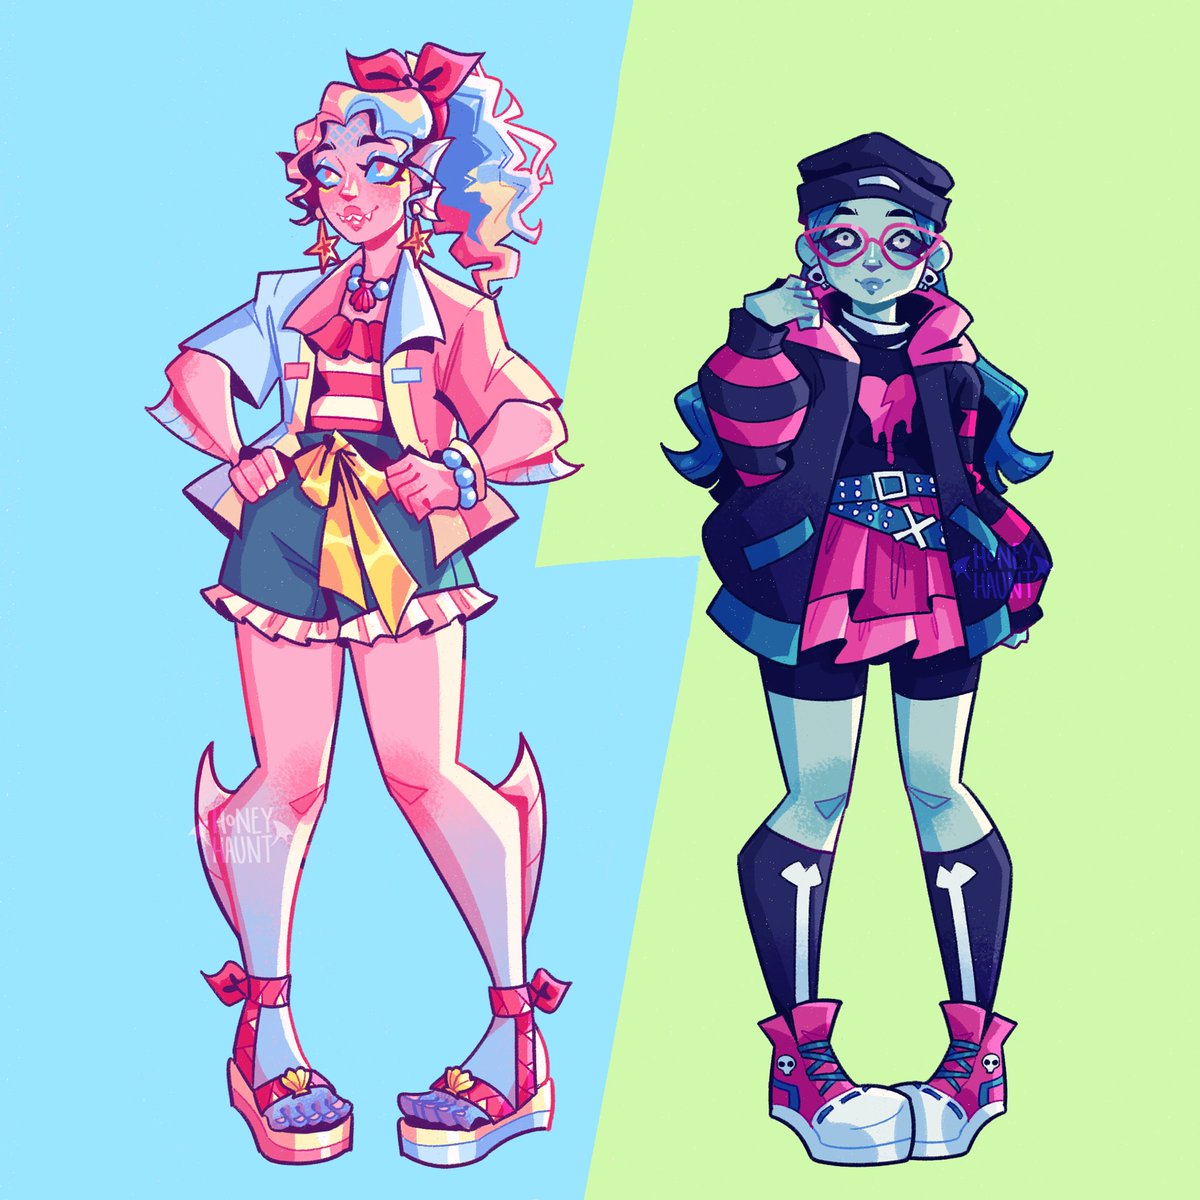 g3 ghouls in my style!! i’ve been loving this series a lot and i wanted to draw them to update my style a bit 💕💖 #monsterhighg3 #cleodenile #frankiestein #clawdeenwolf #draculaura #lagoonablue #ghouliayelps